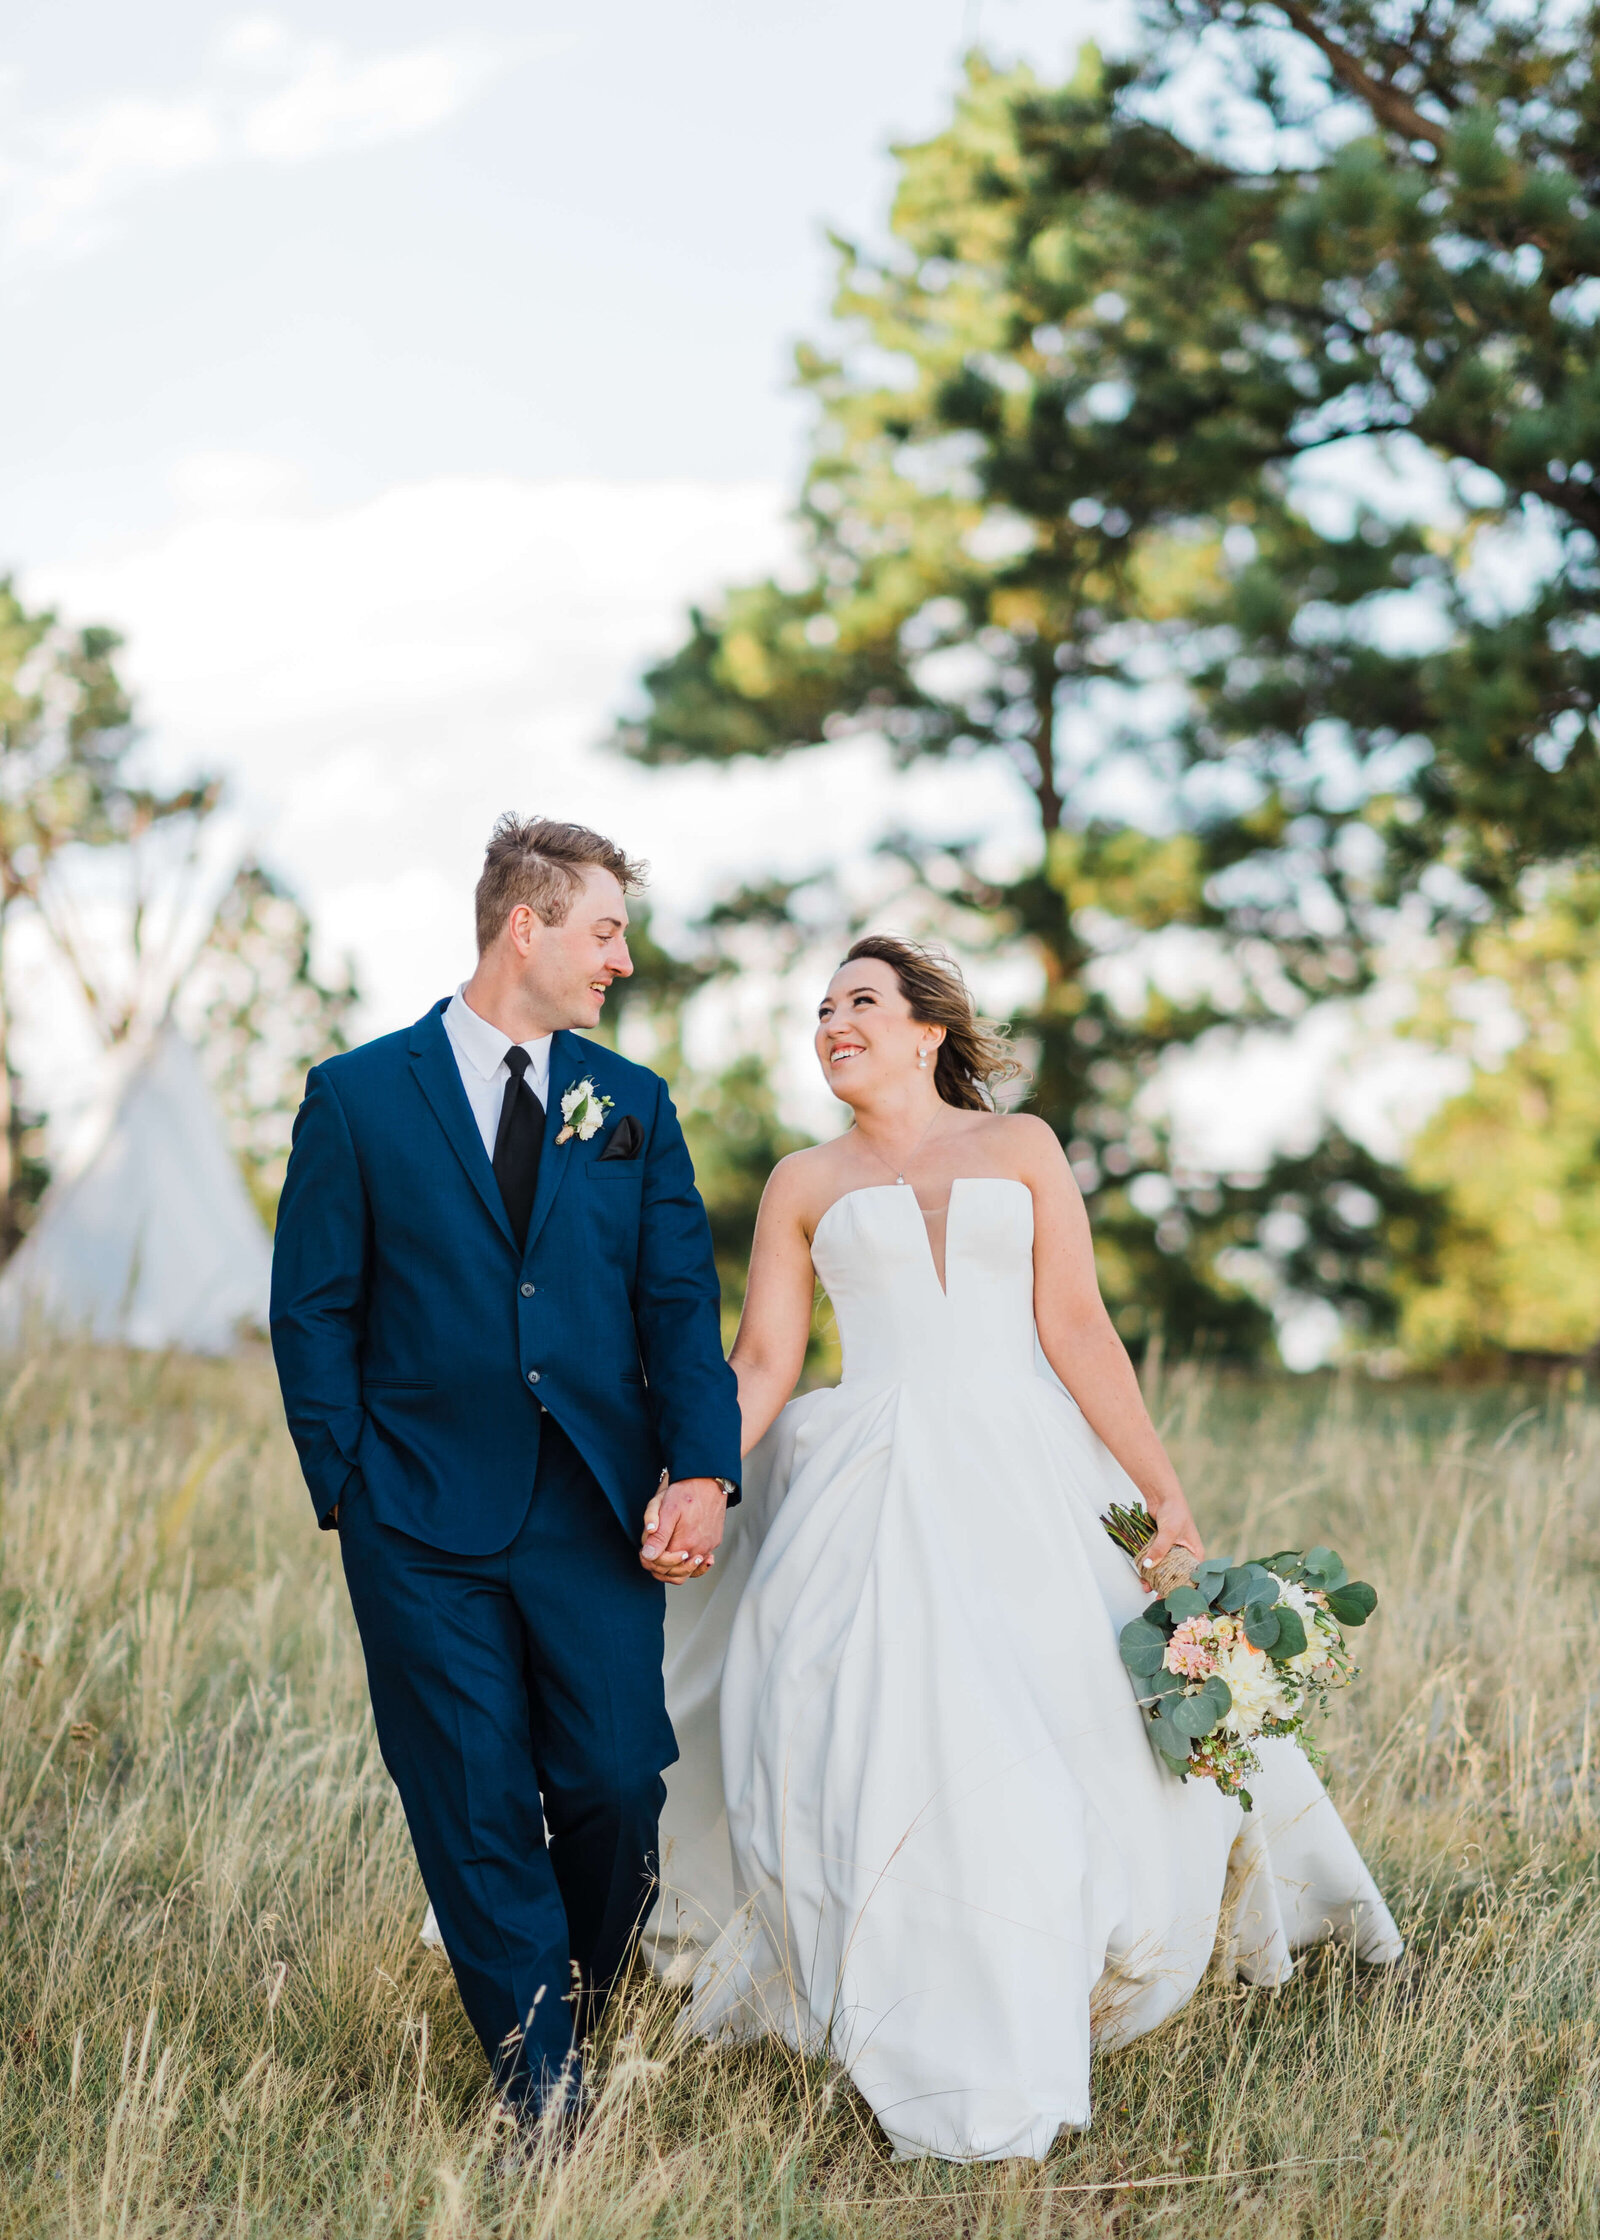 Handsome groom and beautiful bride walk together in a field in an image taken by Virginia wedding photographer